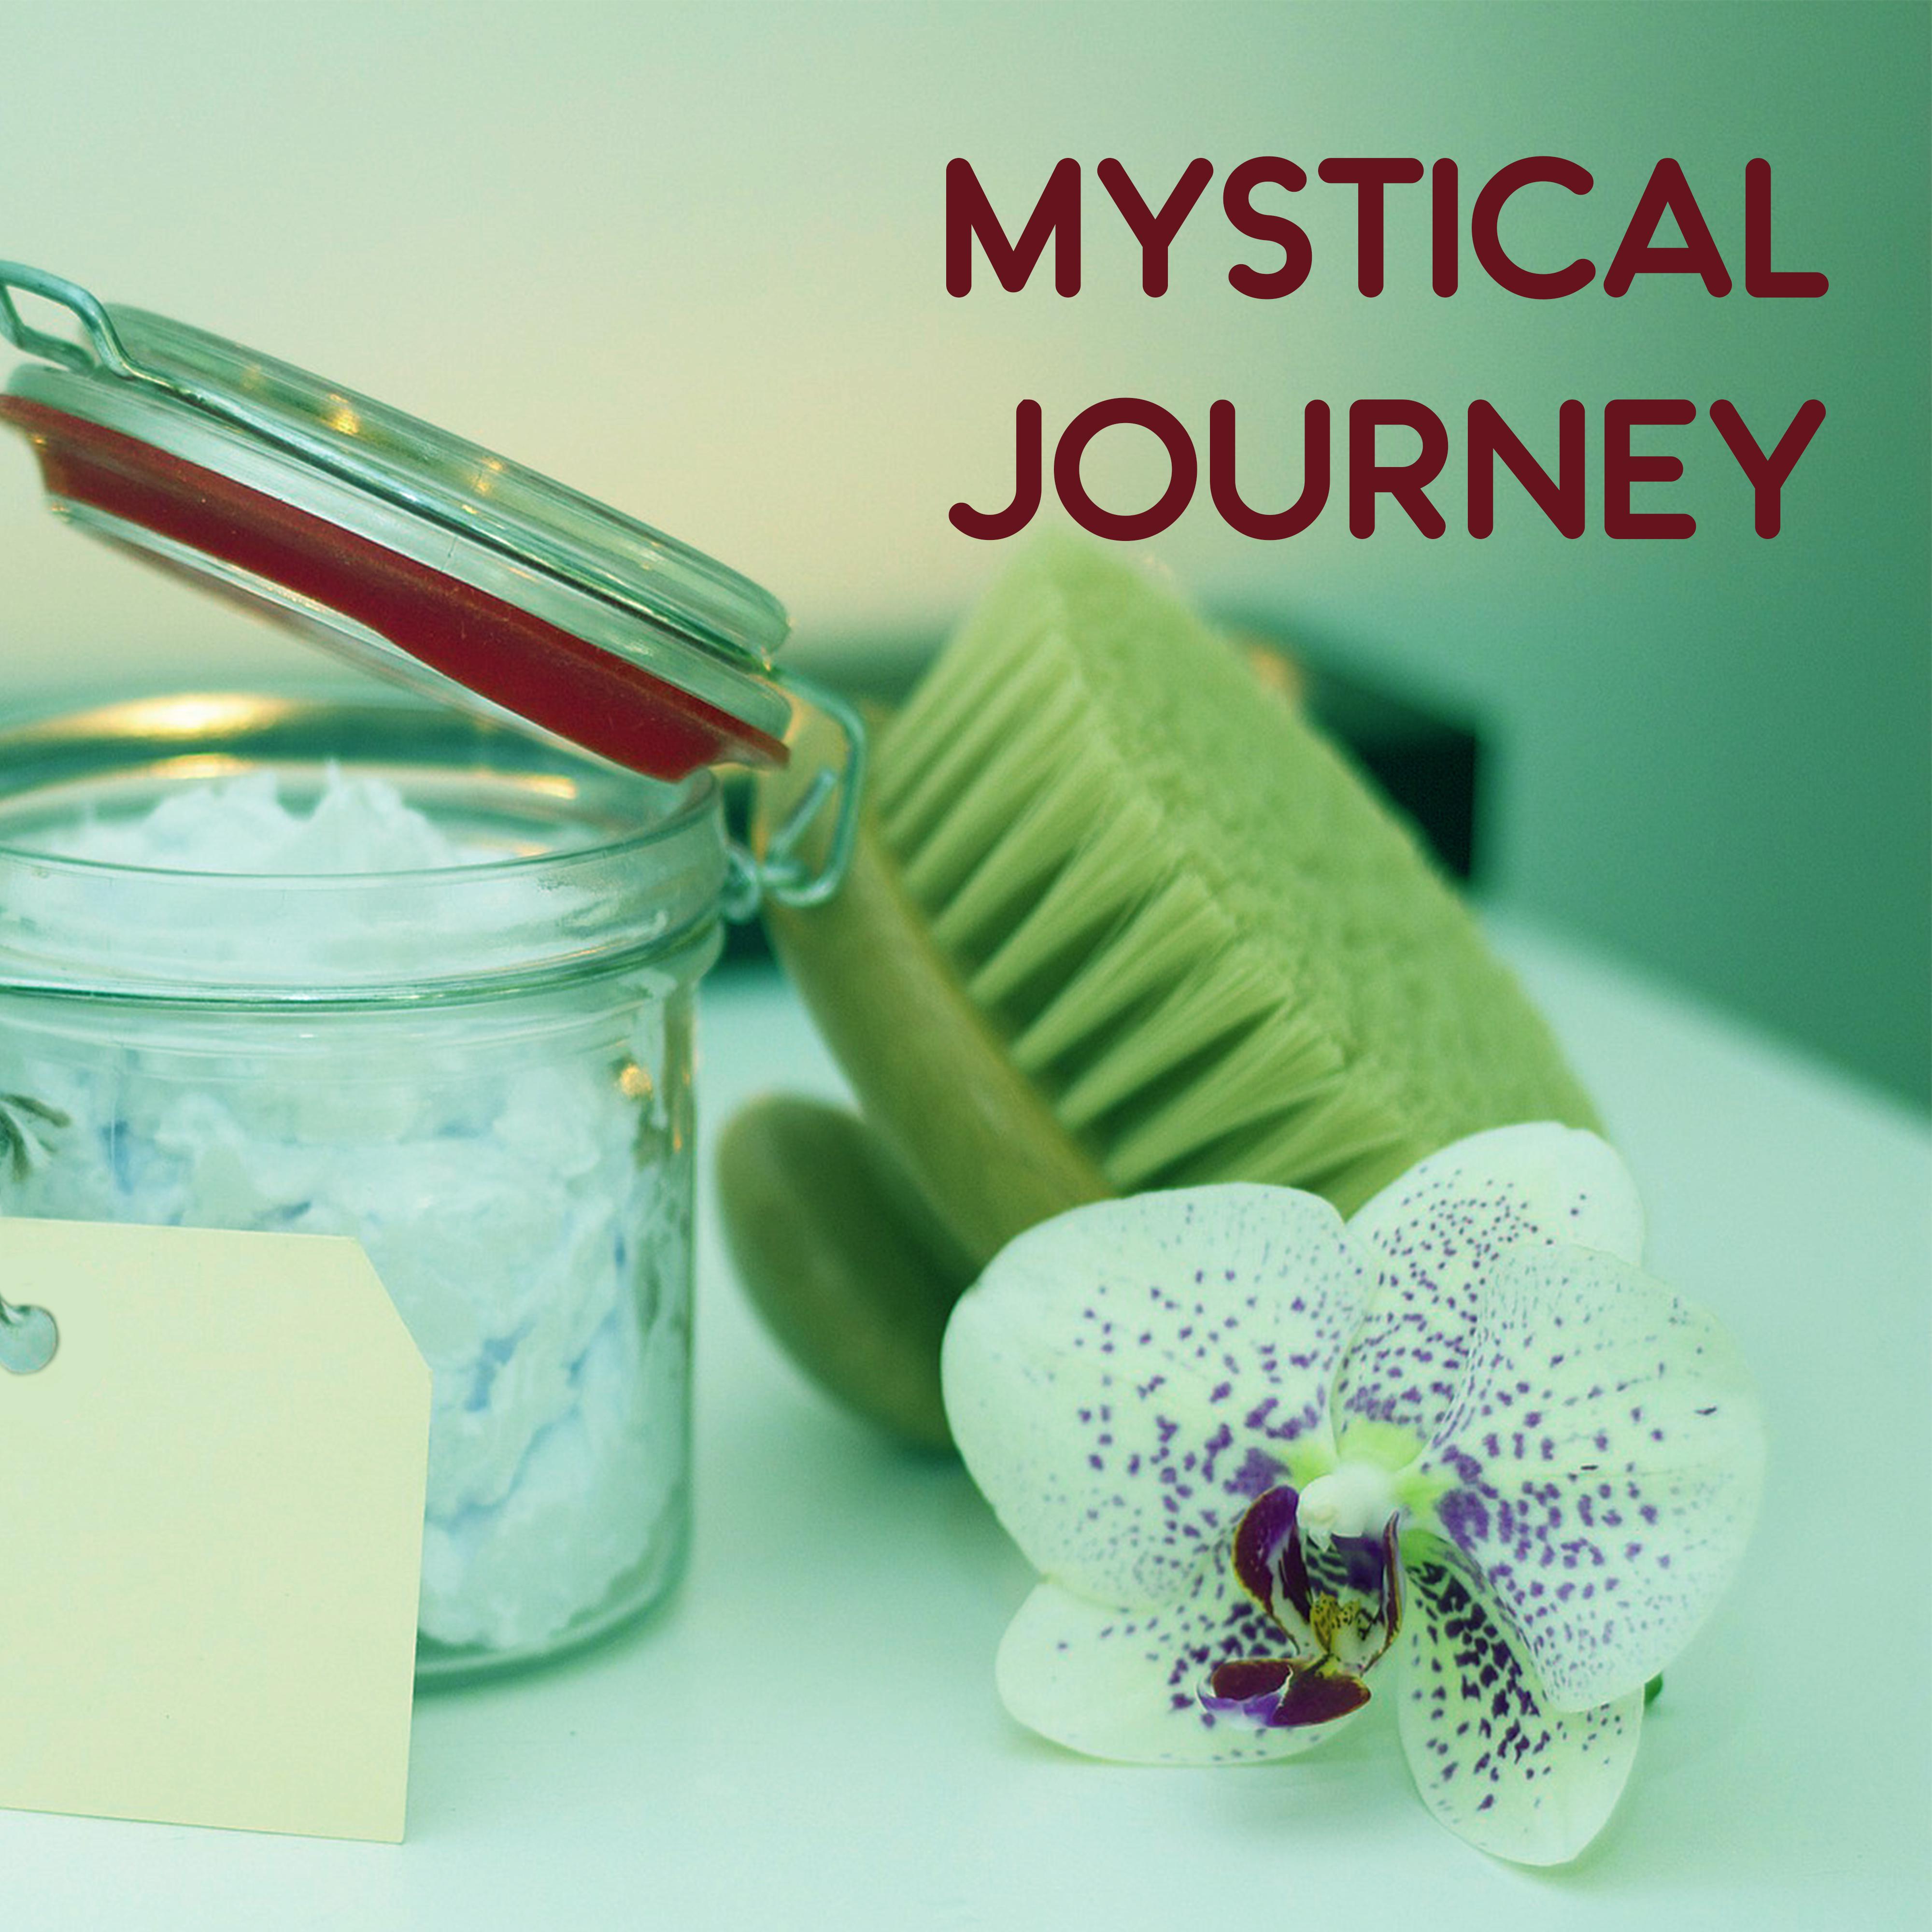 Mystical Journey – Spa Music, Relaxation Sounds for Wellness, Healing Reiki, Meditation Sounds, Clear Mind